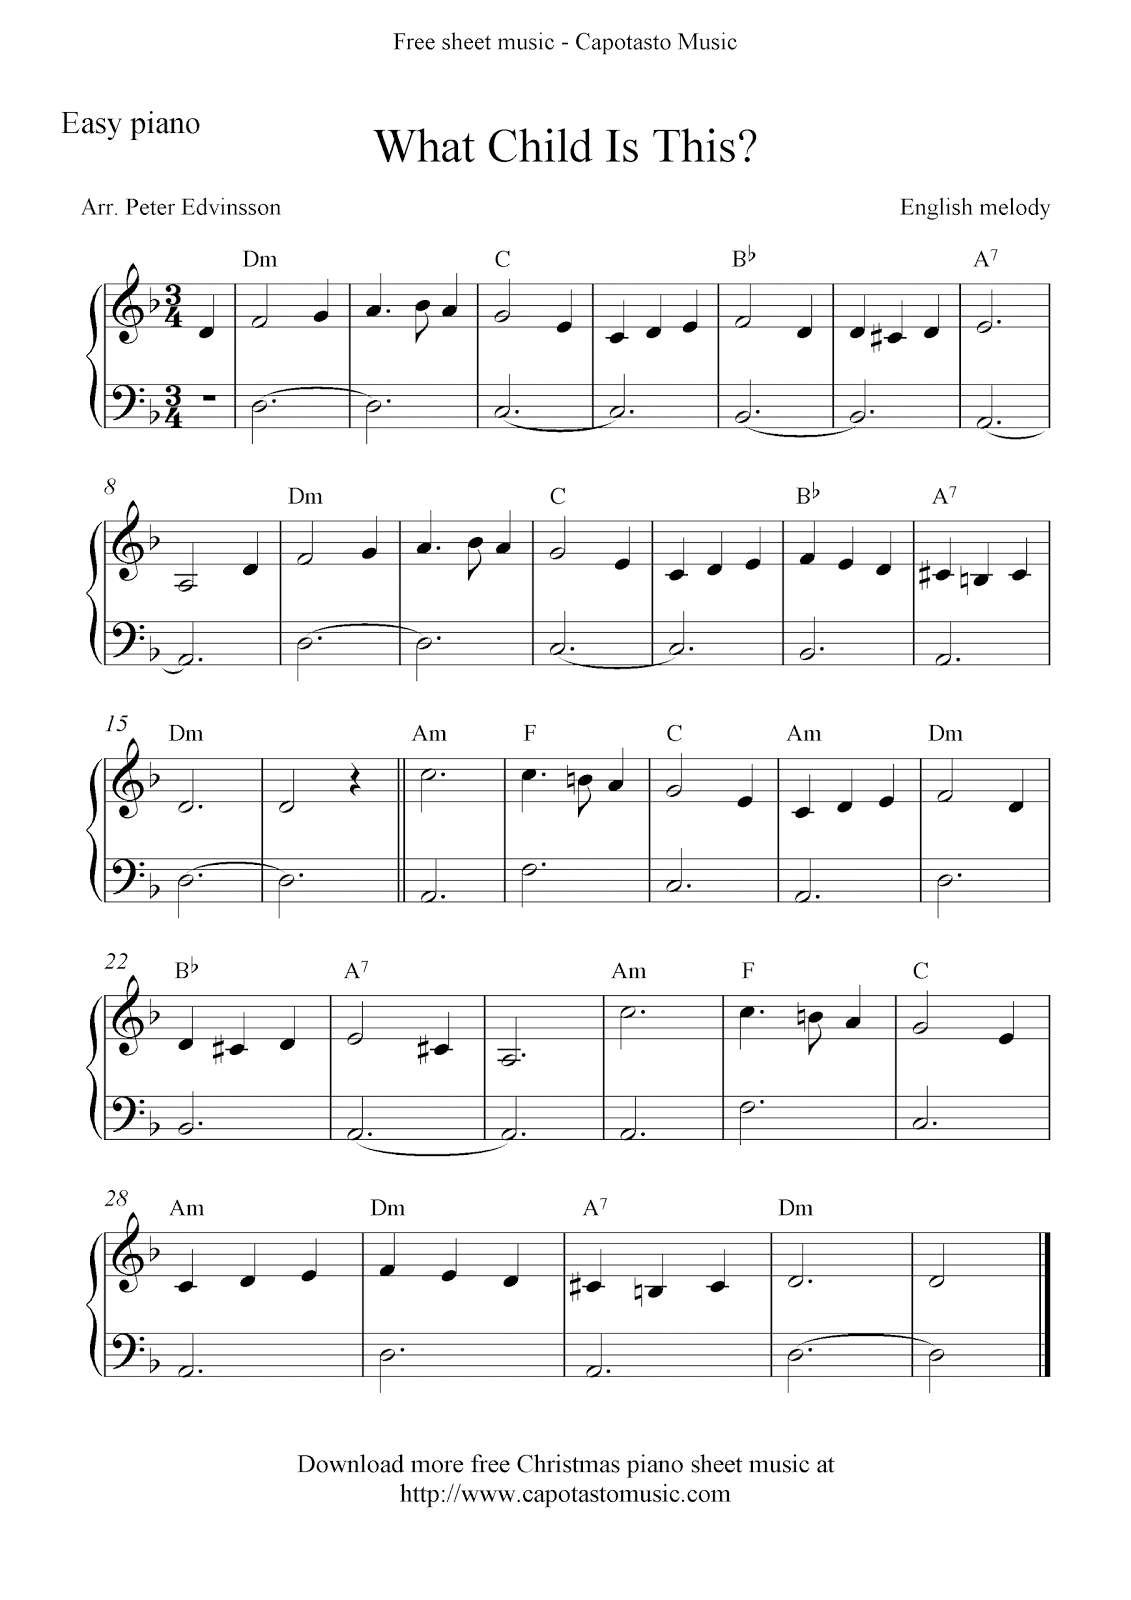 Free Christmas Piano Sheet Music, What Child Is This? - Christmas Piano Sheet Music Easy Free Printable